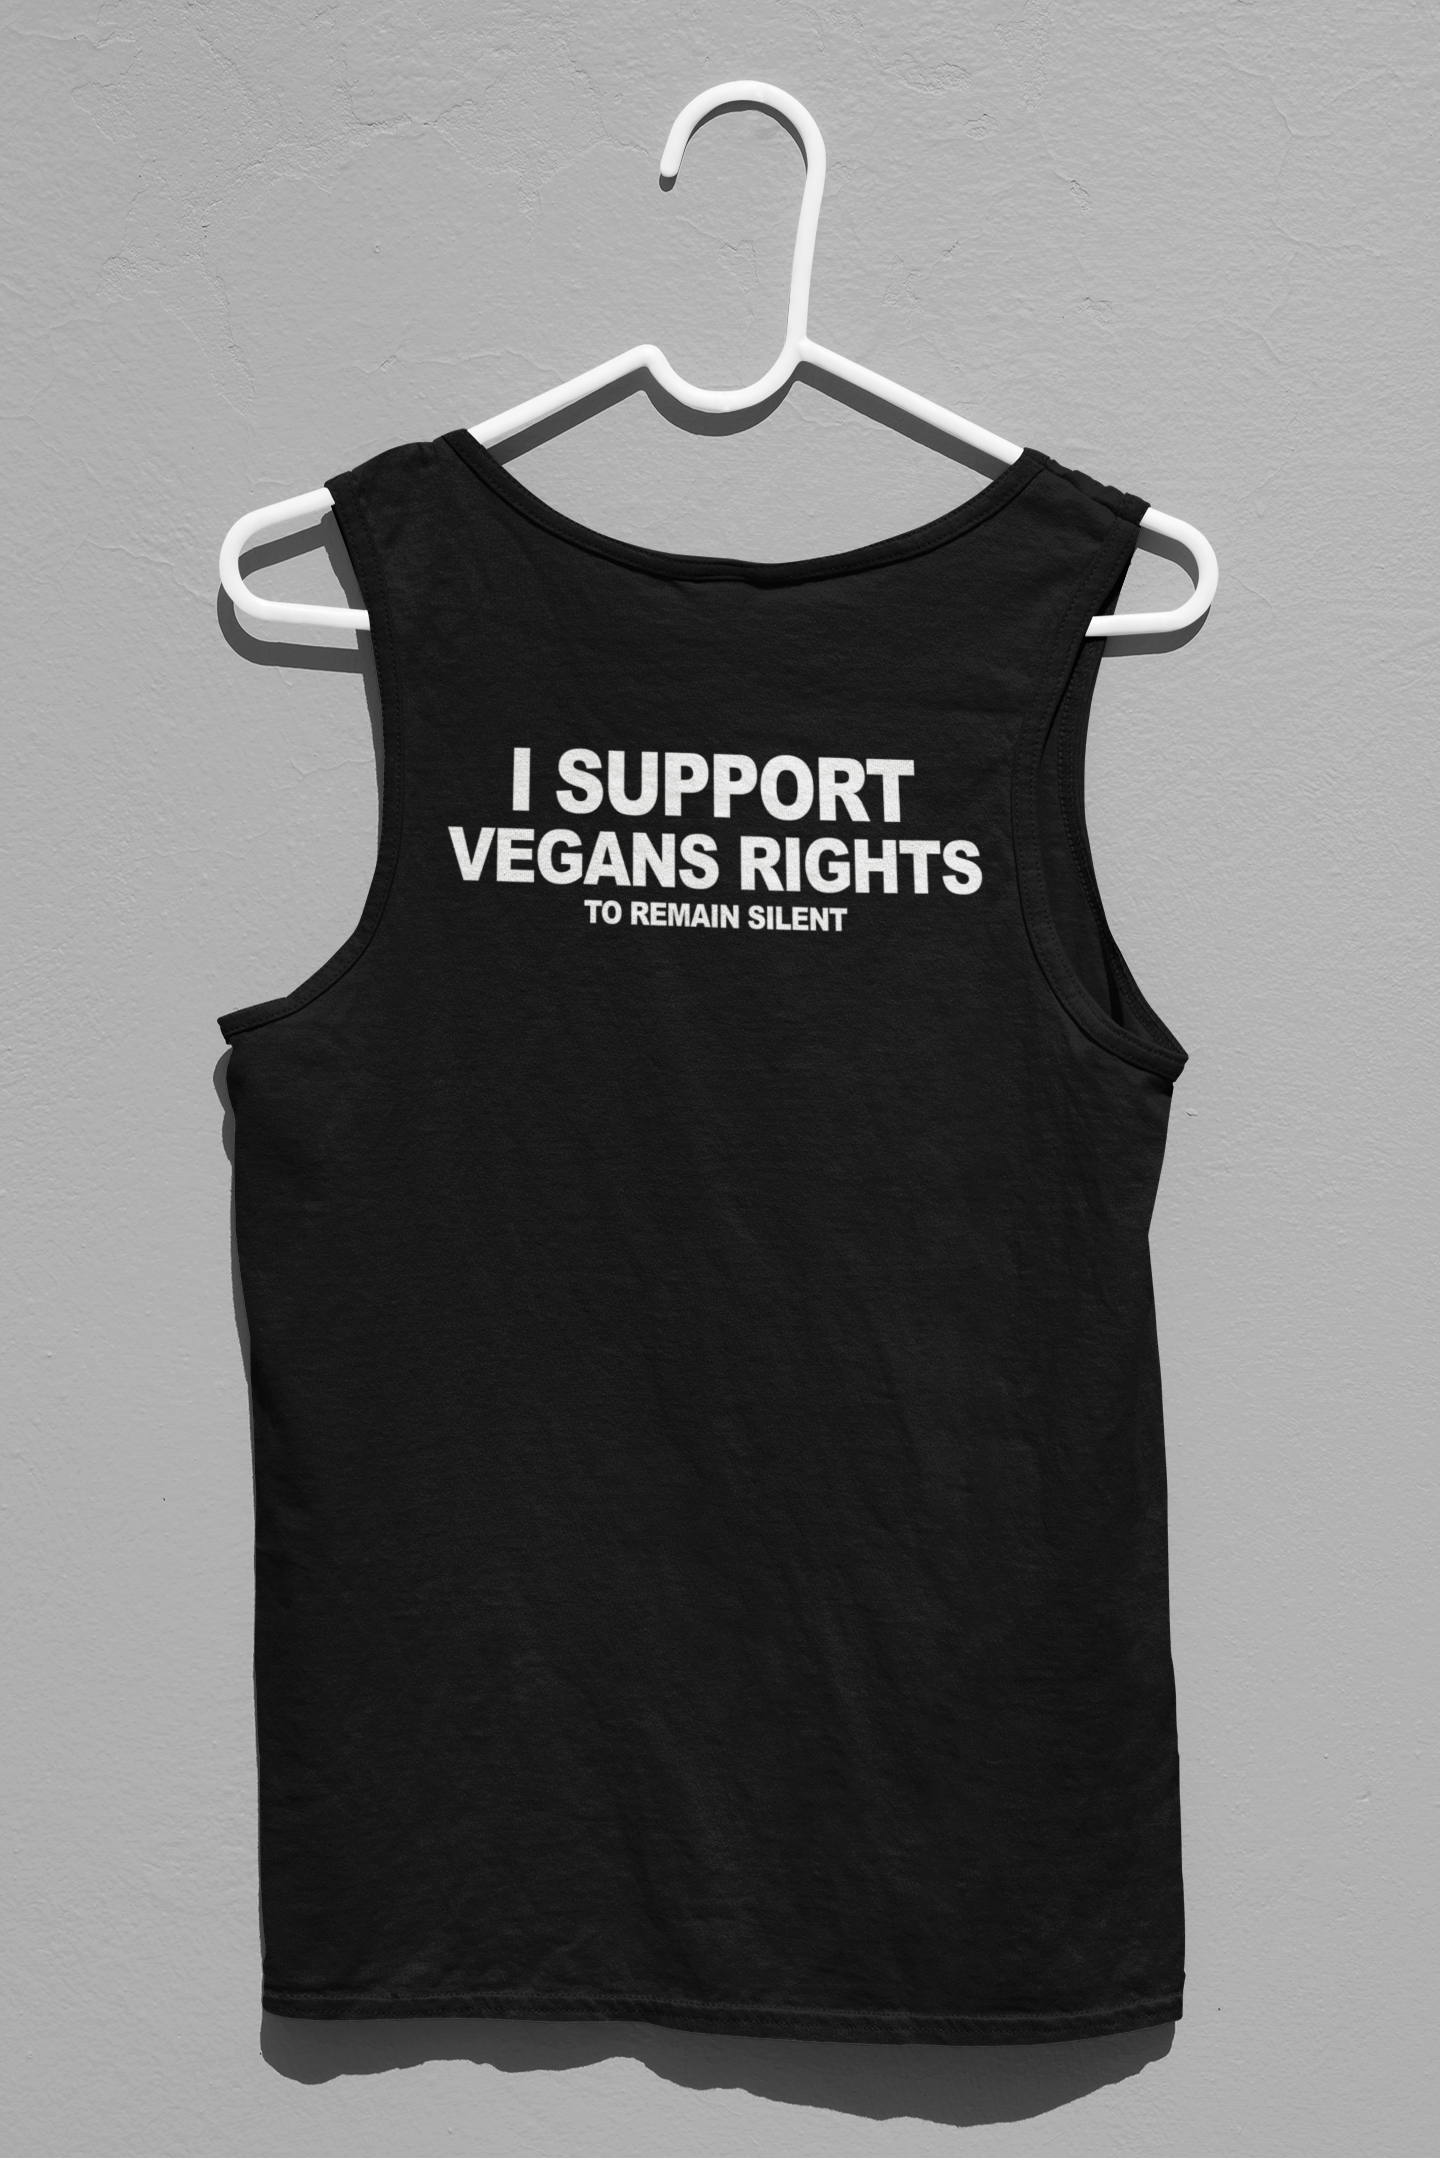 I Support Vegans Rights To Remain Silent Tank